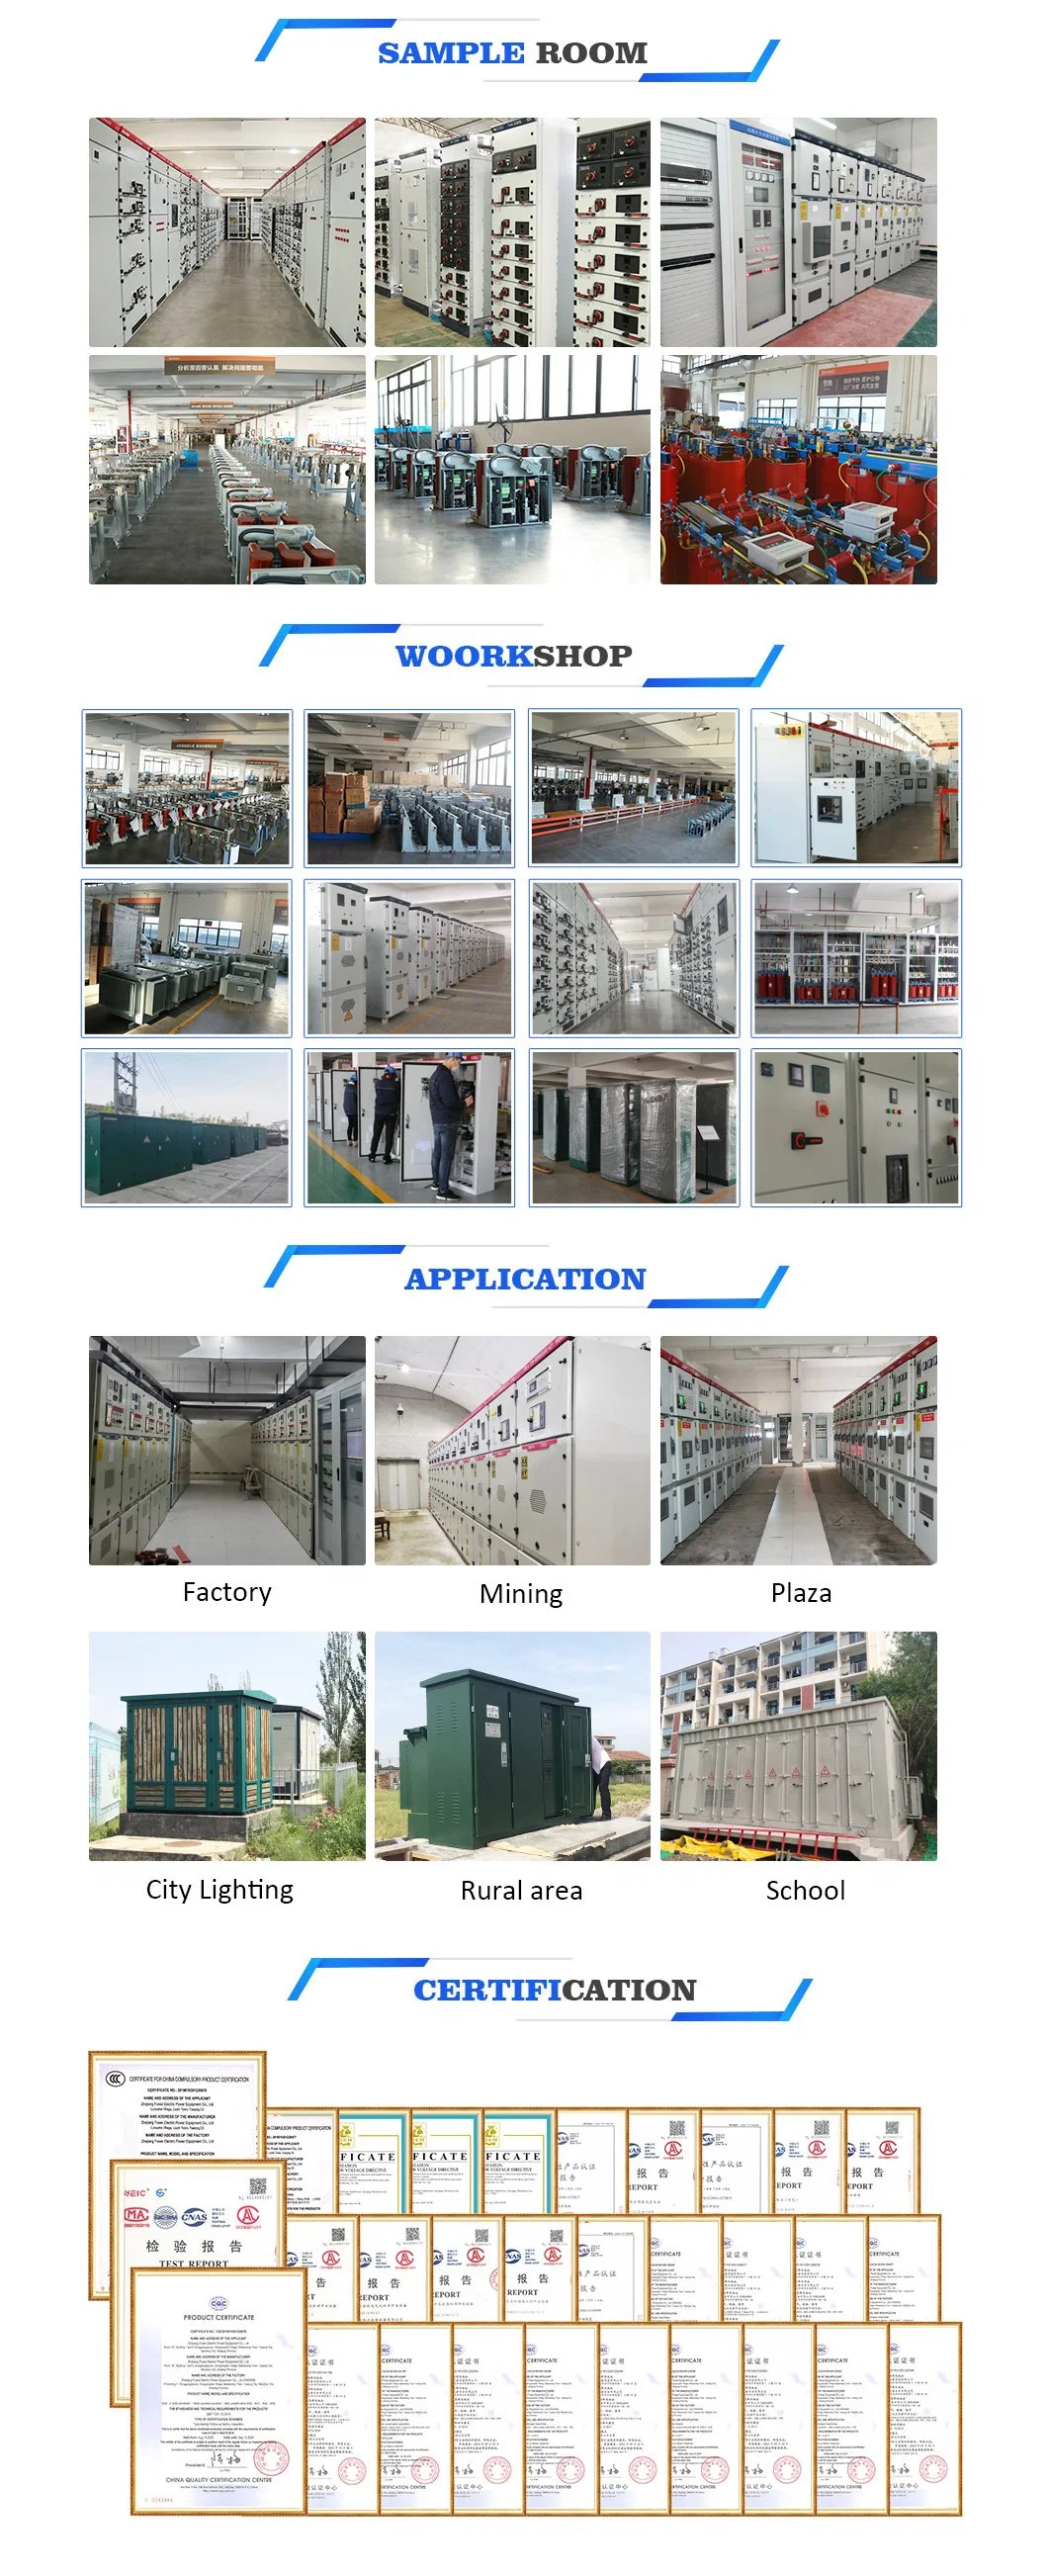 XL21 Low Voltage Switchgear Metal Enclosed Electric Control Cabinet Power Distribution Equipment Manufacturer